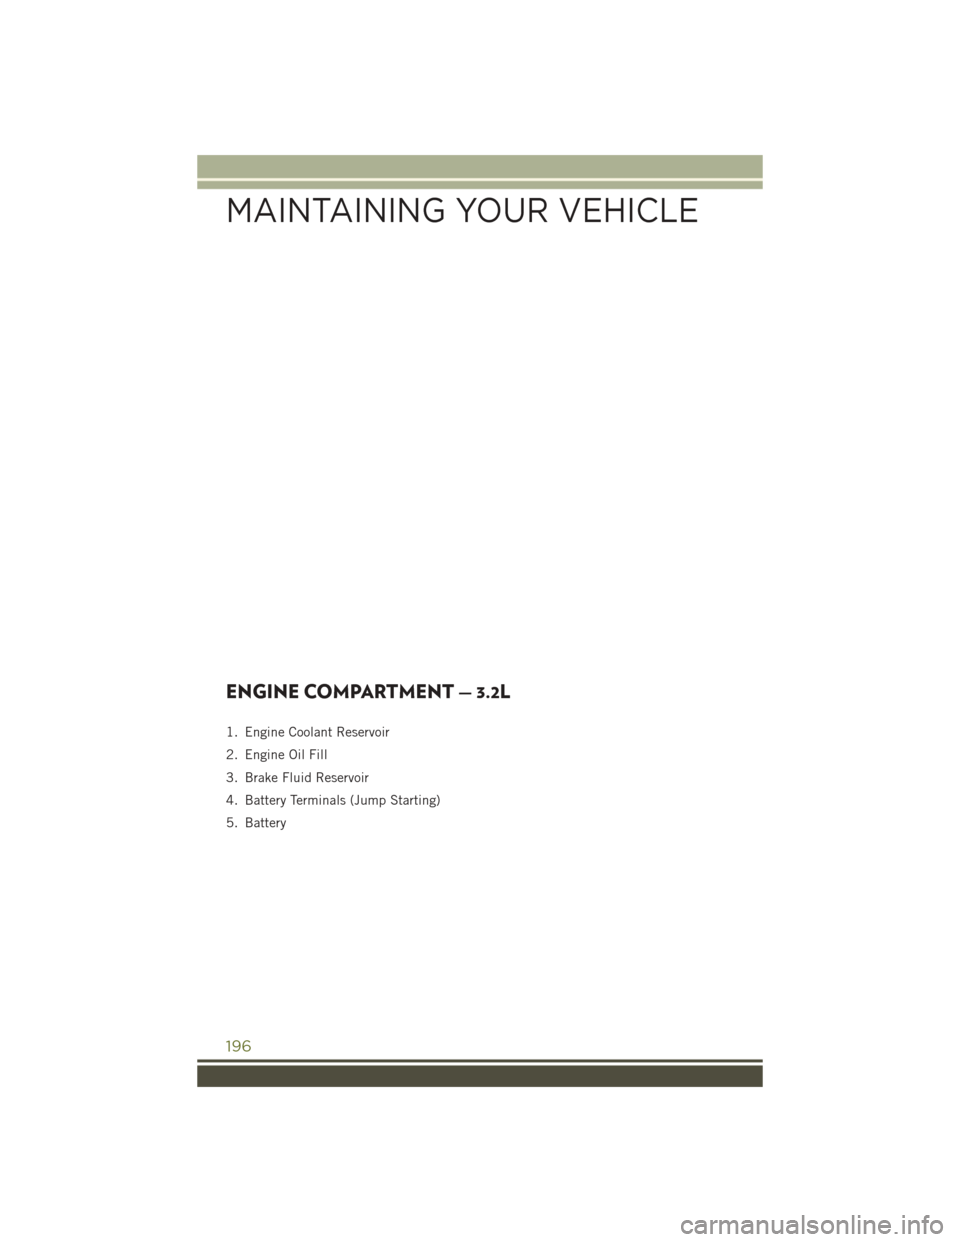 JEEP CHEROKEE 2016 KL / 5.G Service Manual ENGINE COMPARTMENT — 3.2L
1. Engine Coolant Reservoir
2. Engine Oil Fill
3. Brake Fluid Reservoir
4. Battery Terminals (Jump Starting)
5. Battery
MAINTAINING YOUR VEHICLE
196 